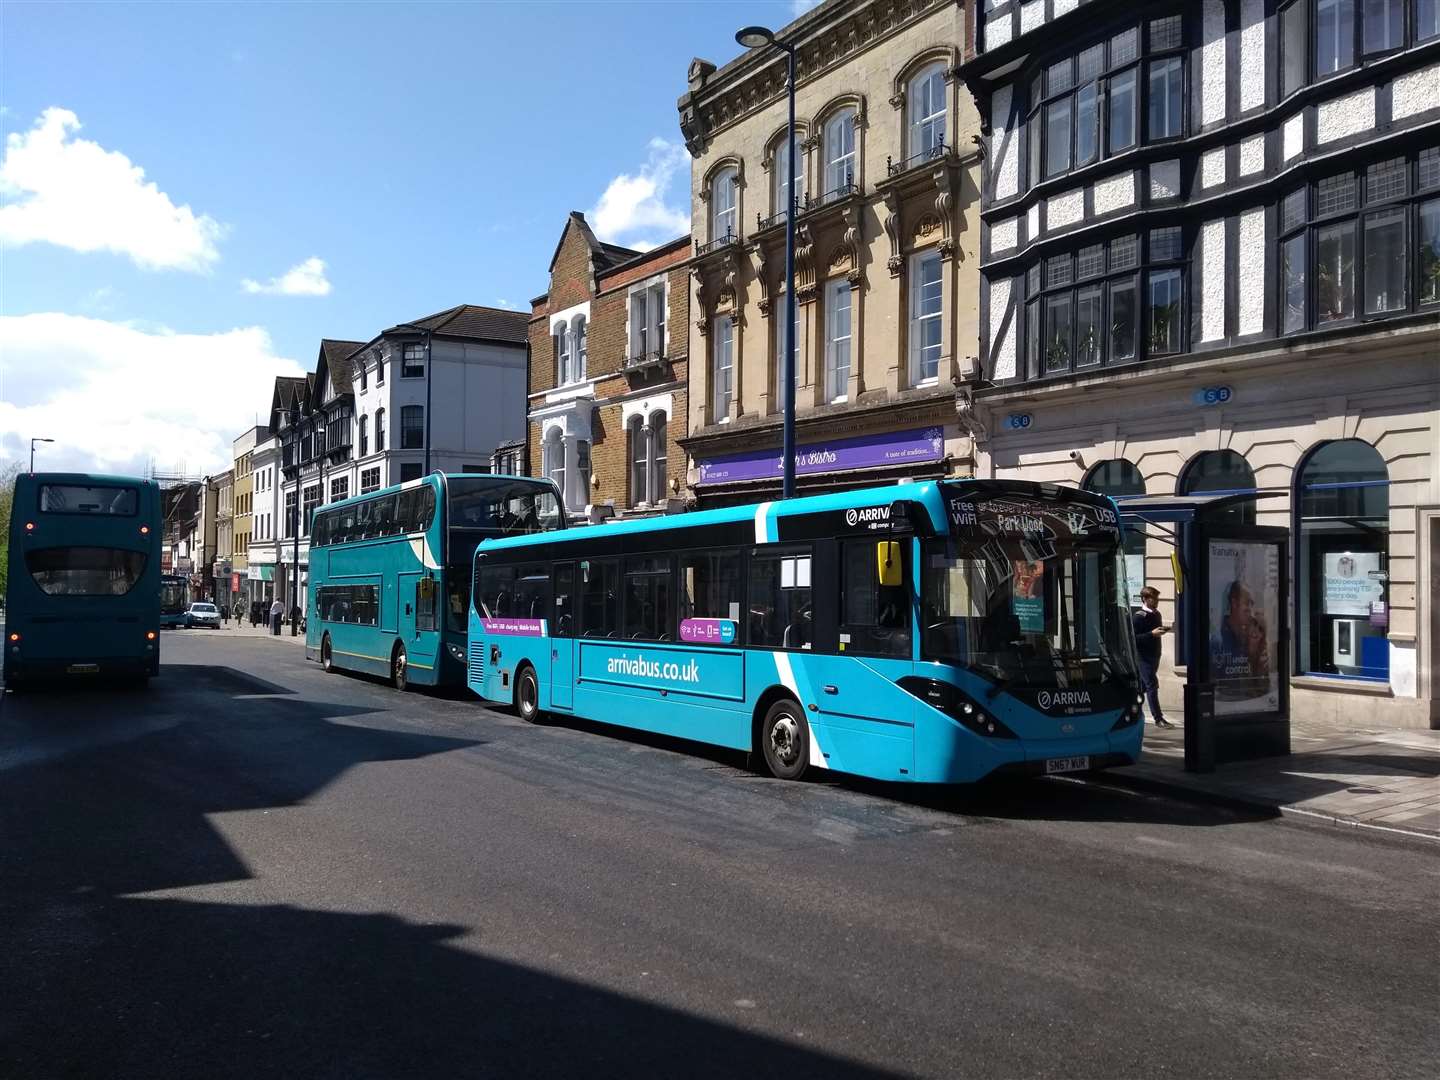 Arriva recently announced it was extending the operating hours the pass could be used in